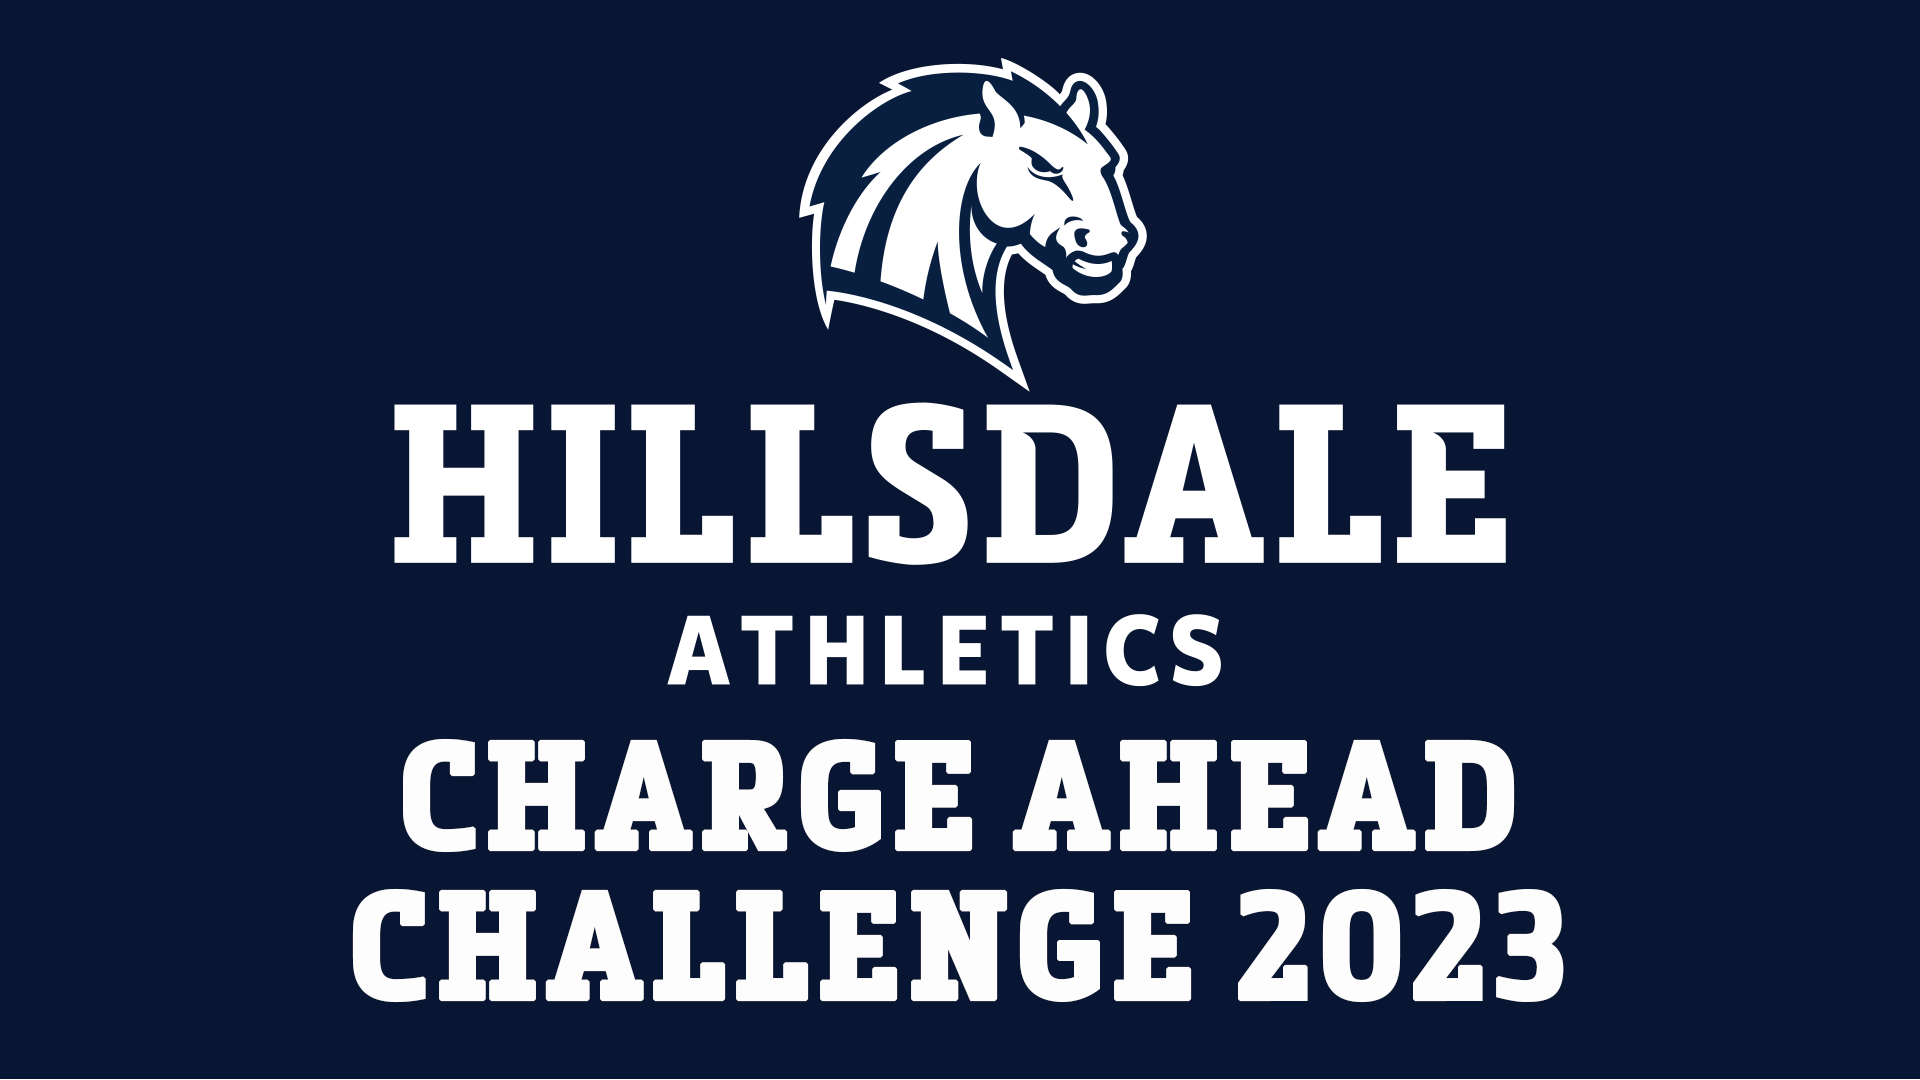 Help lead the Charge!  The 2023 Charge Ahead Challenge is here!